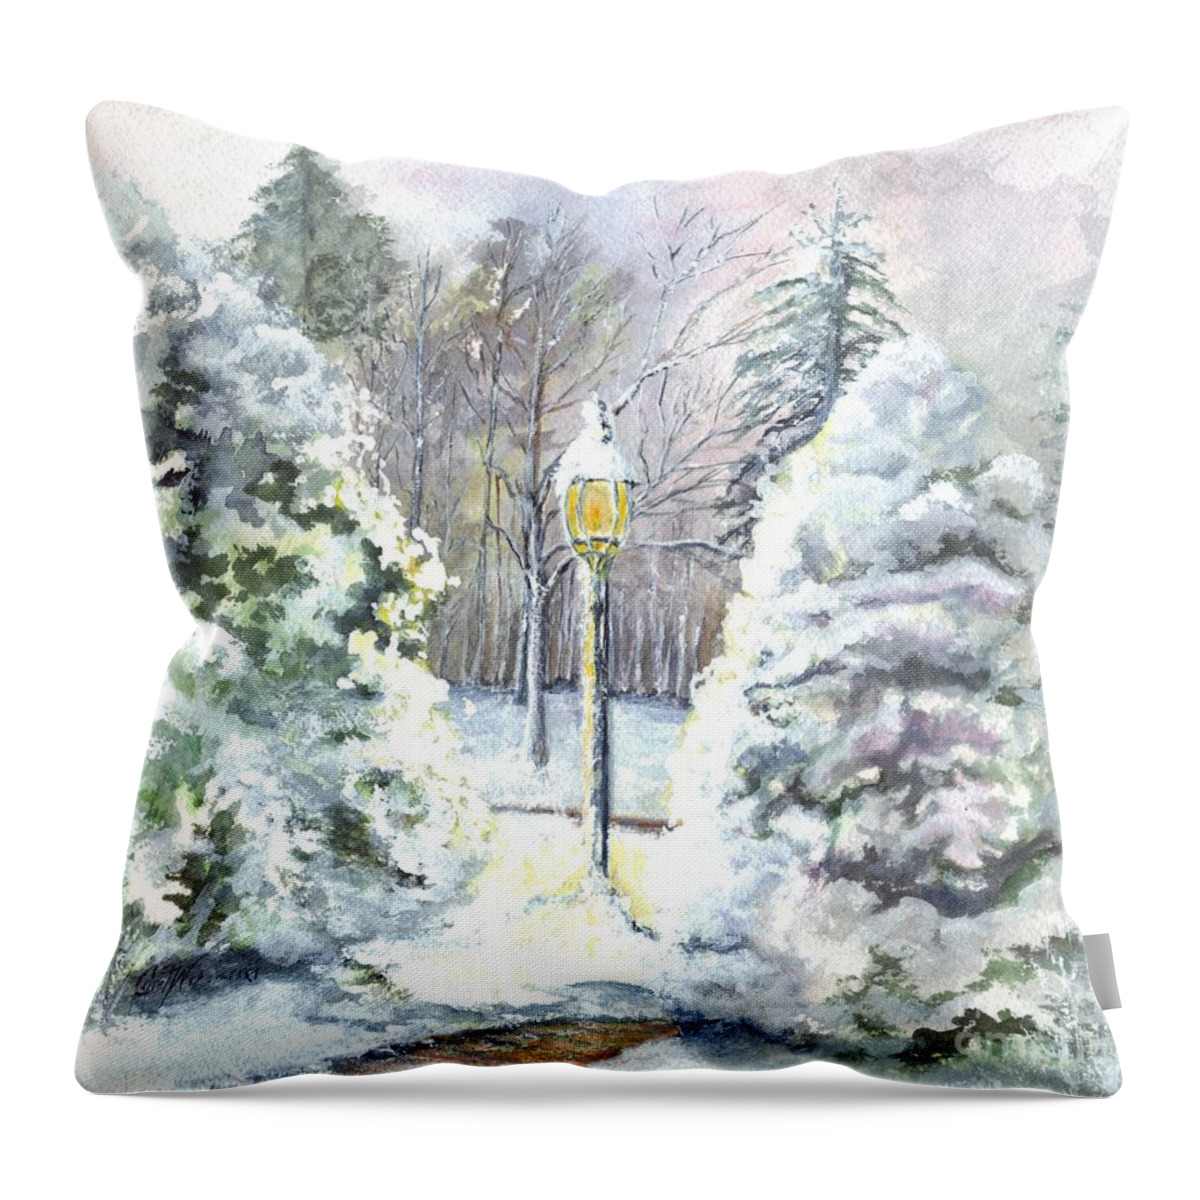 Winter Throw Pillow featuring the painting A Warm Winter Greeting by Carol Wisniewski